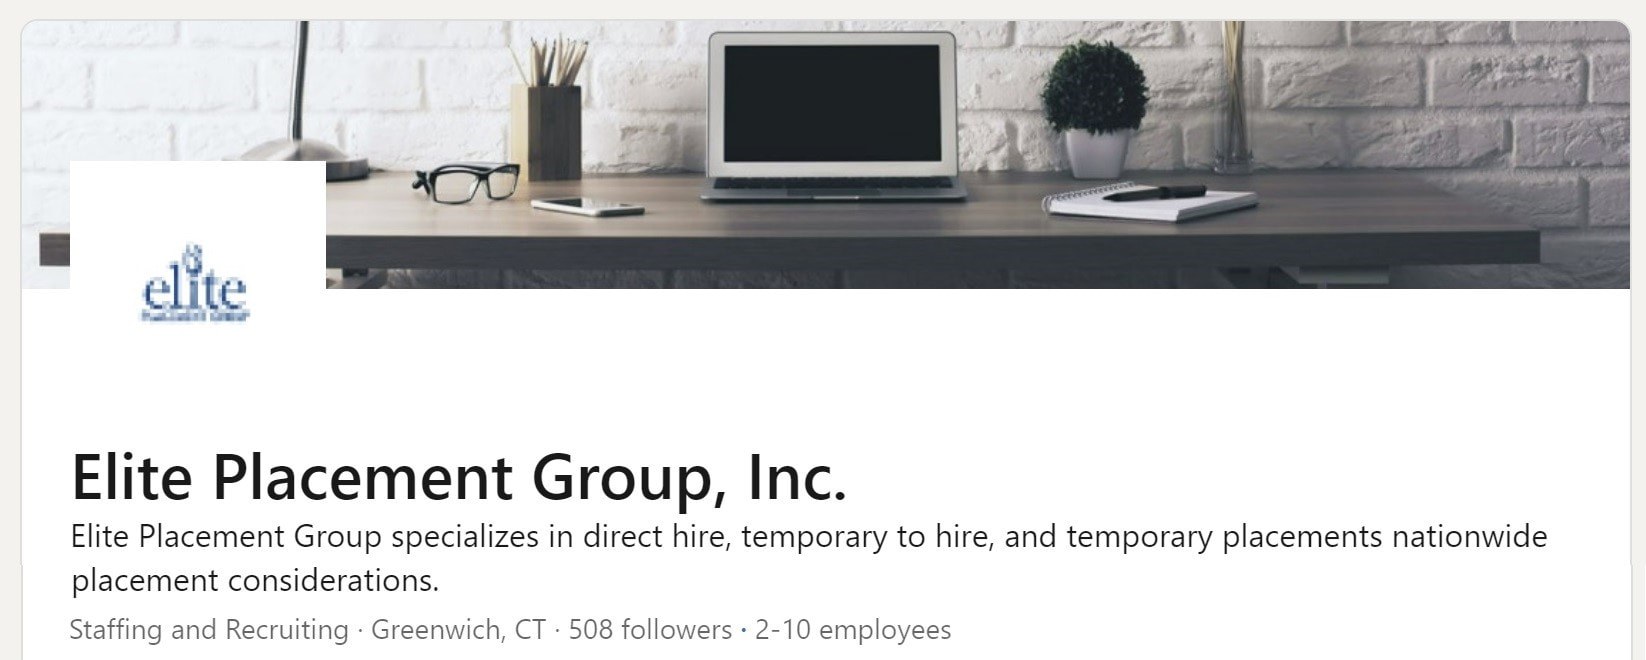 Elite Placement Group on LinkedIn